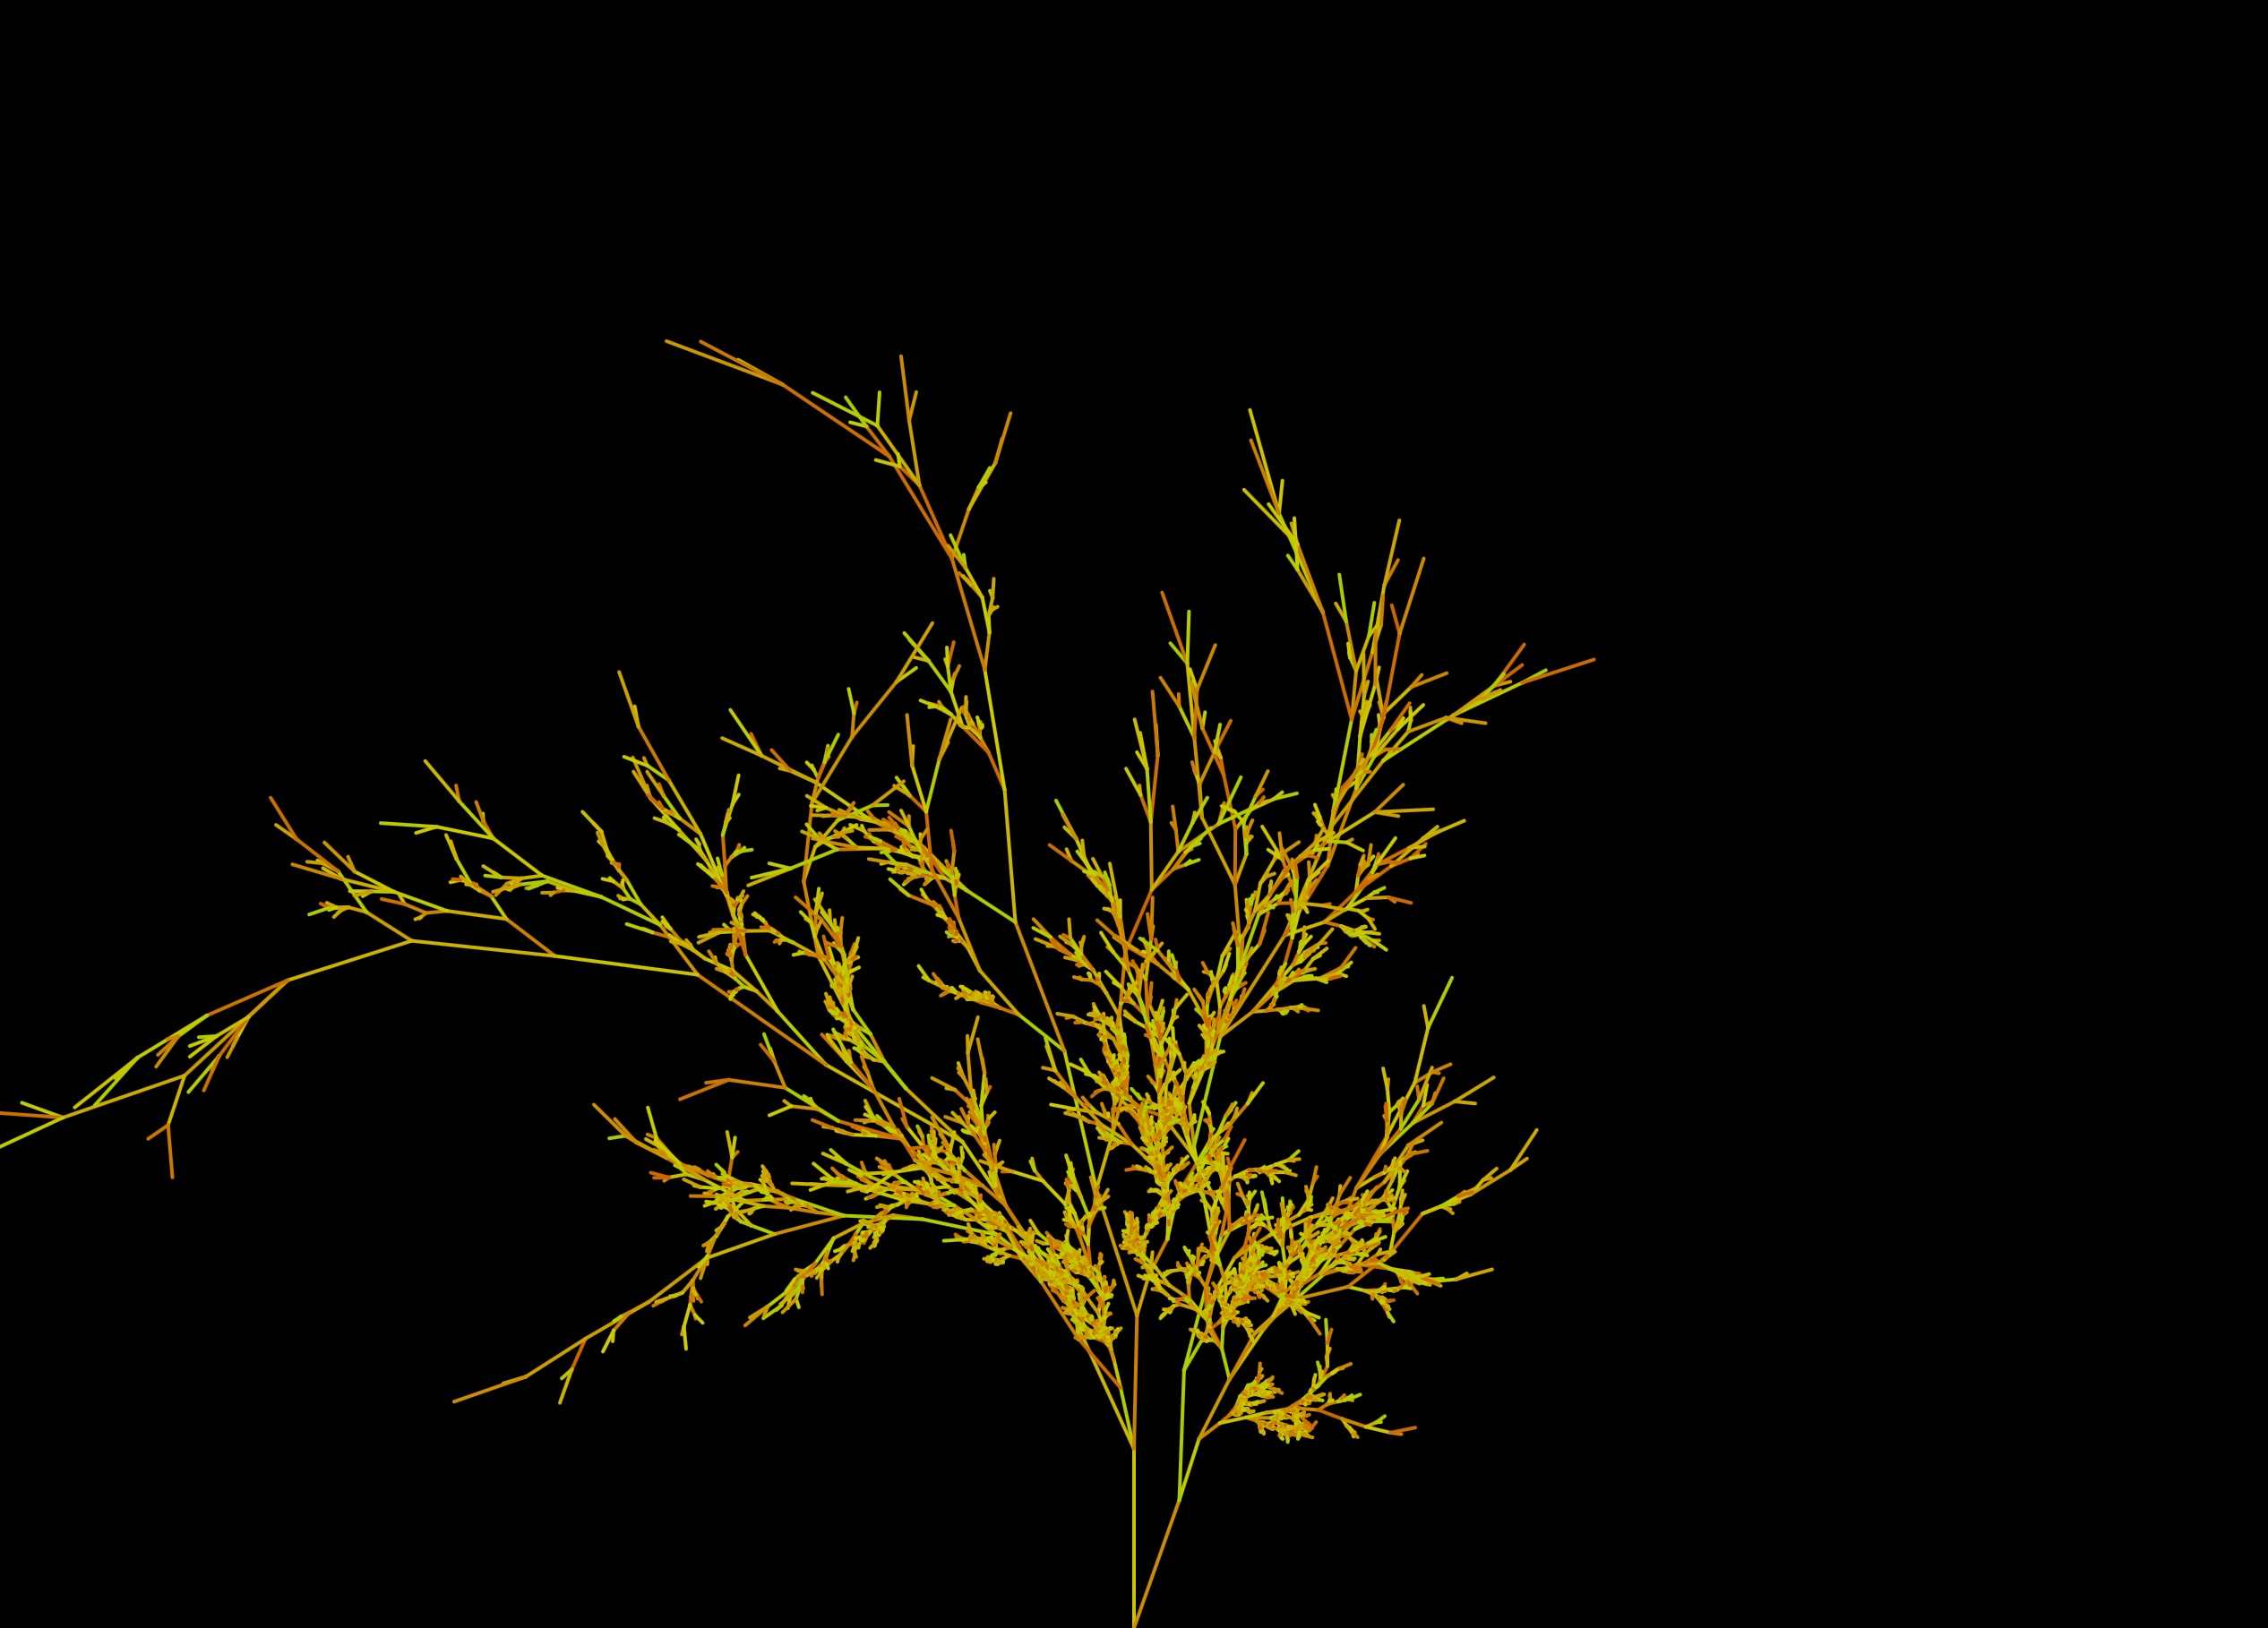 A computer-generated image of a branching tree, in autumnal shades